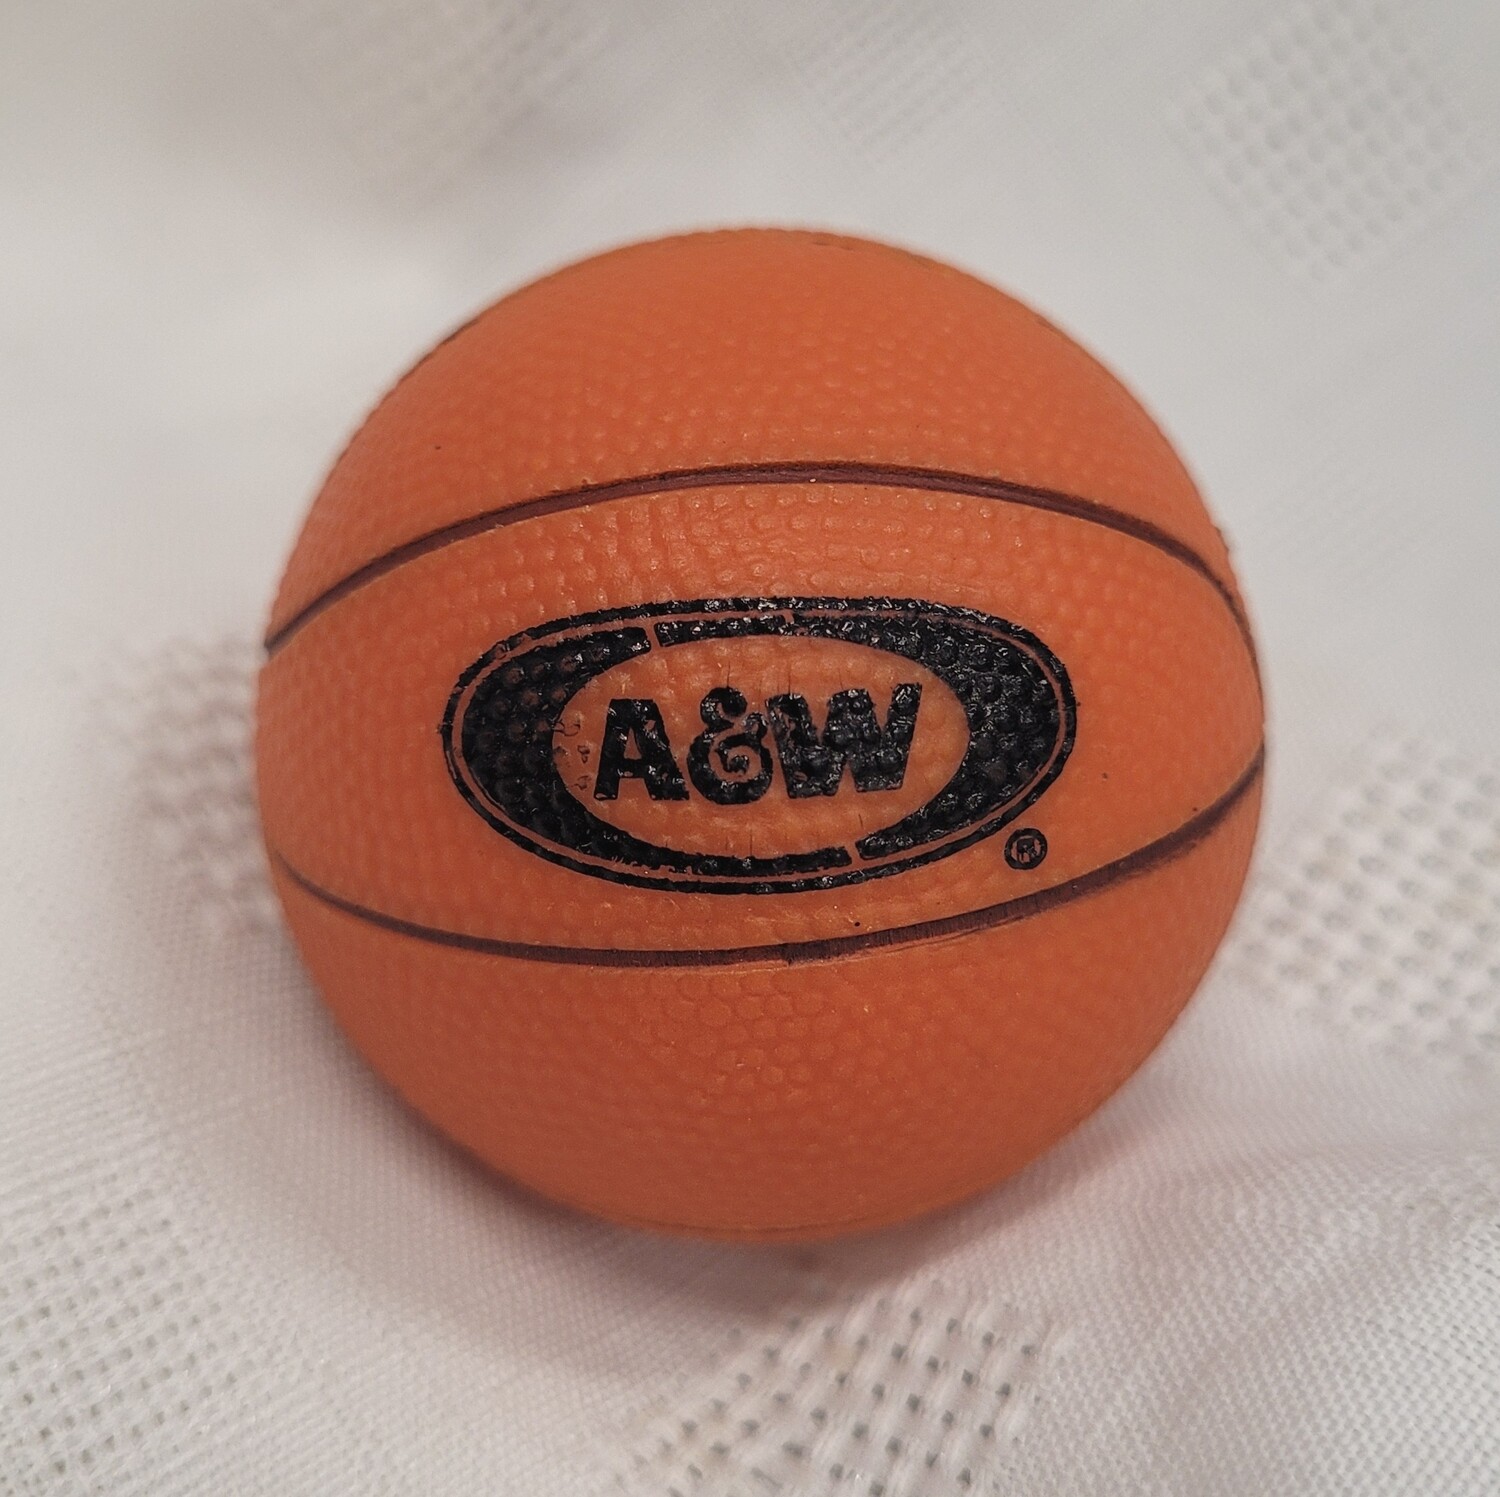 A&W 2"D Plastic Basketball Toy